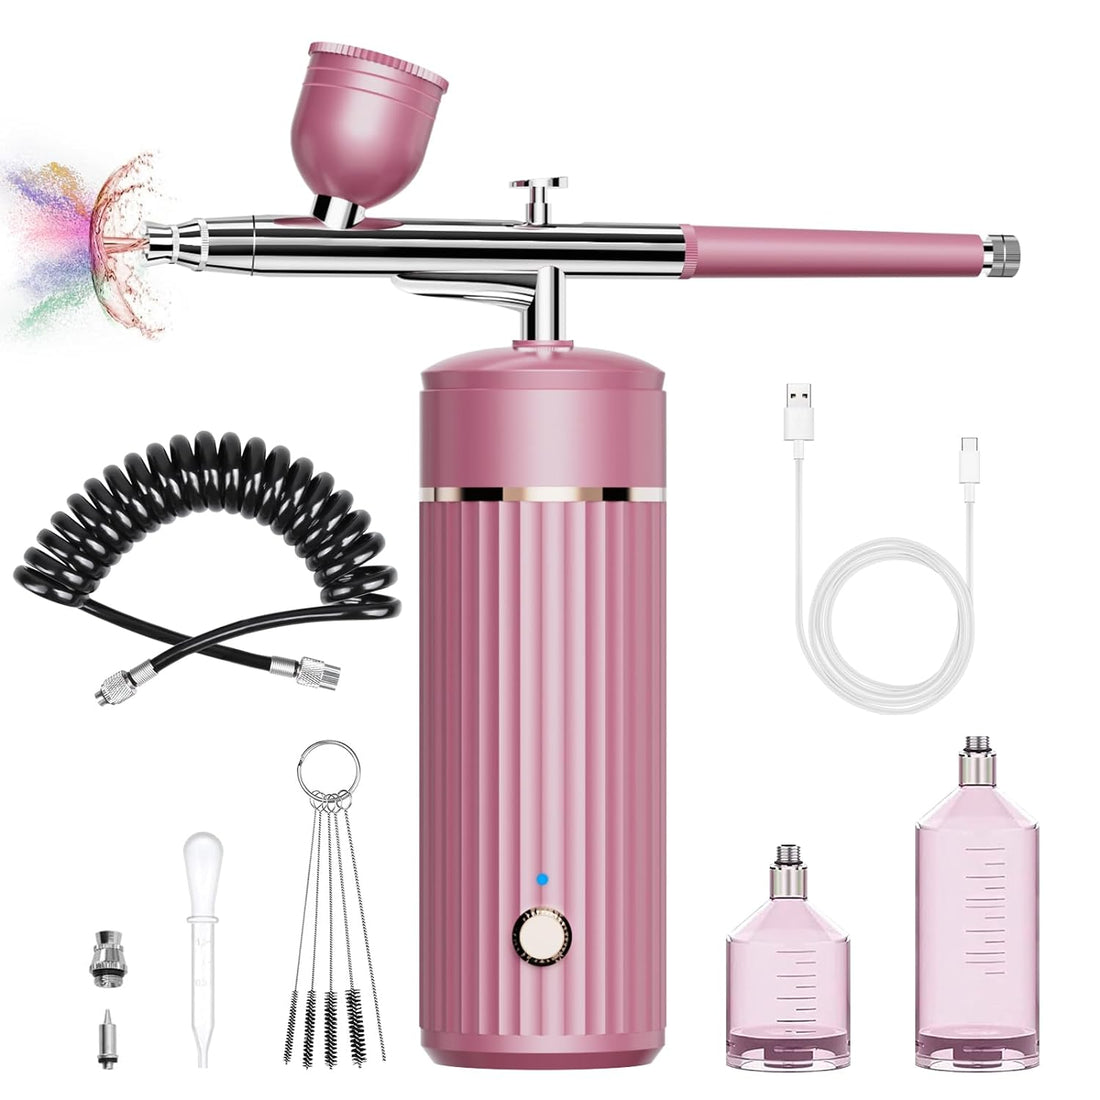 Airbrush Rechargeable Cordless Airbrush-Kit Compressor - 30PSI High Pressure Airbrush Gun with Hose Wireless Air Brush for Painting,Makeup,Barber, Nail Art, Cake Decor